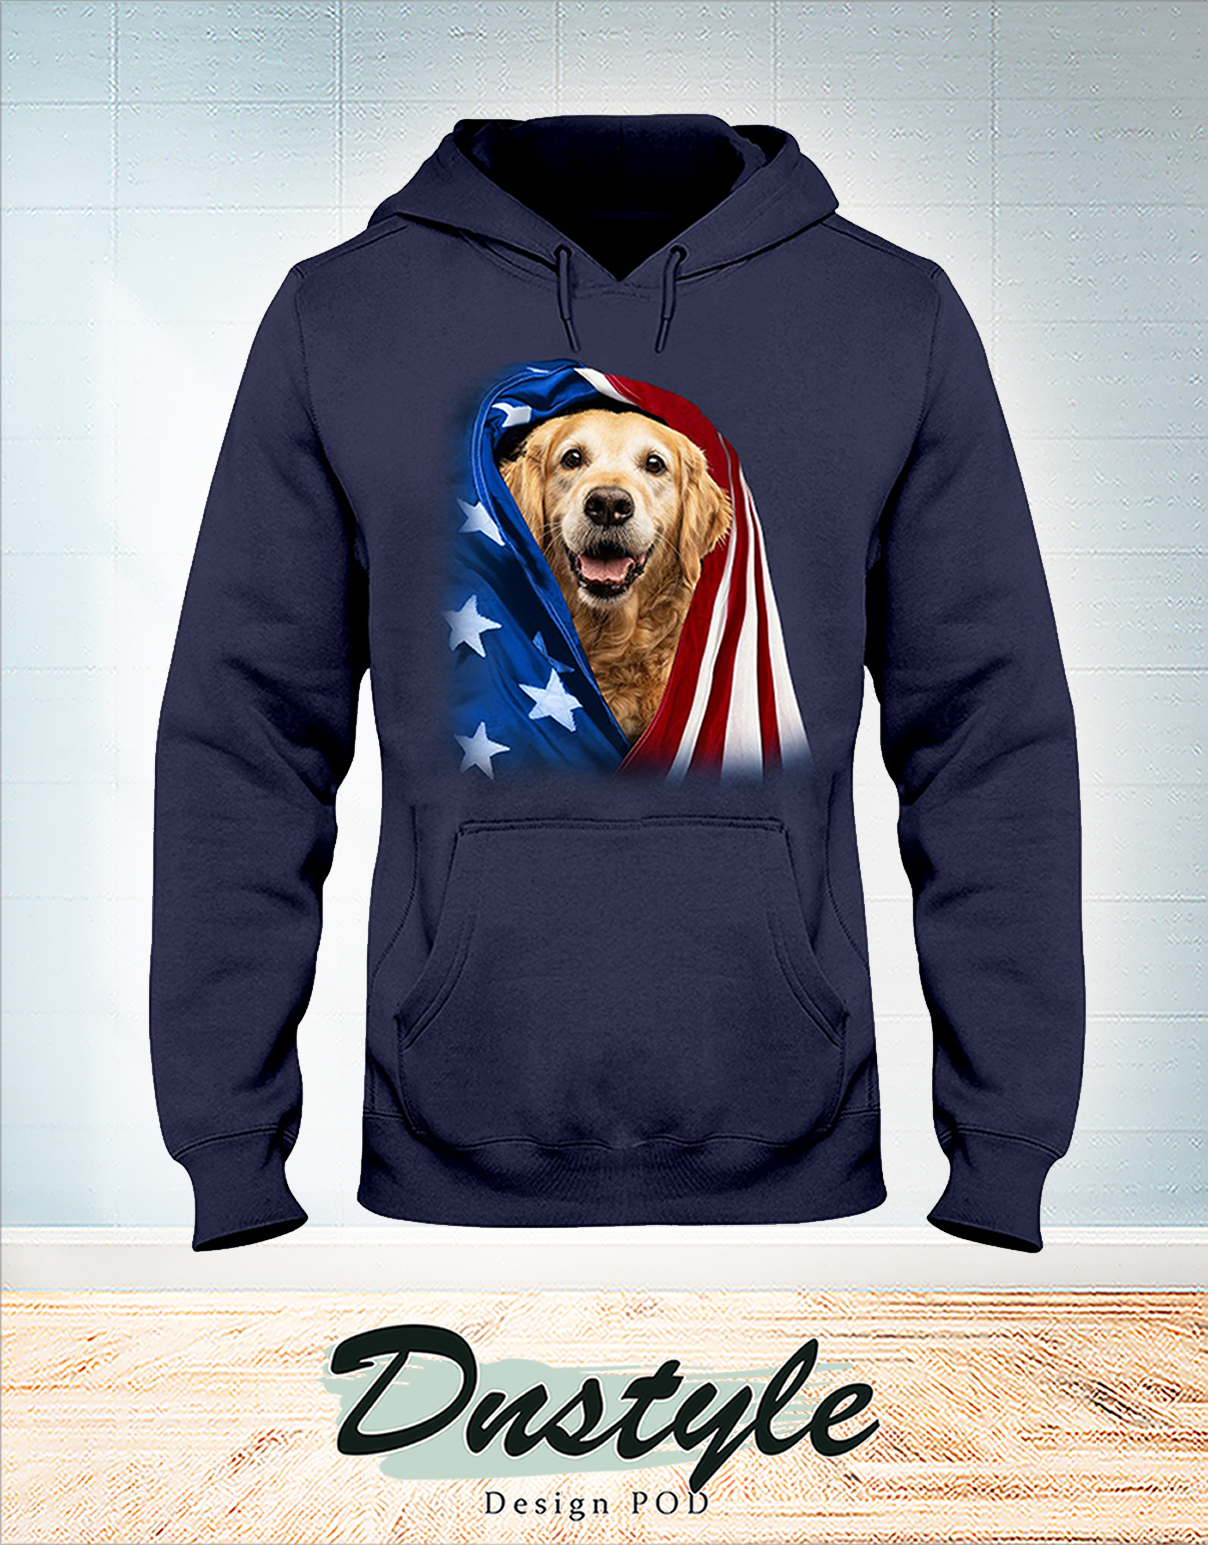 Golden Retriever wrapped in america flag 4th july hoodie